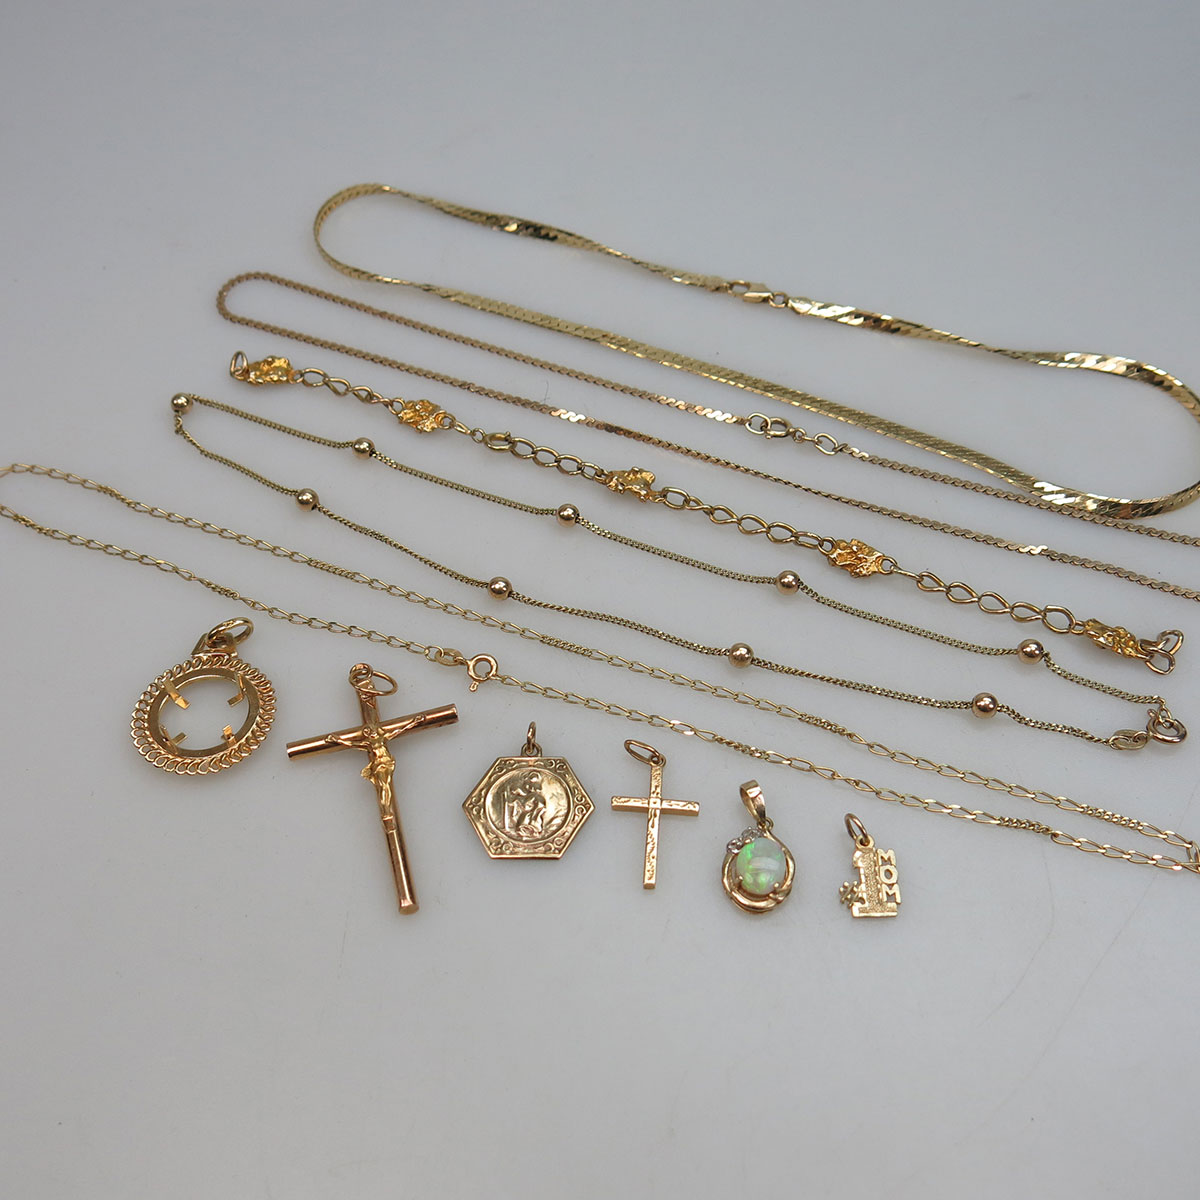 Small Quantity Of Gold Chains And Charms